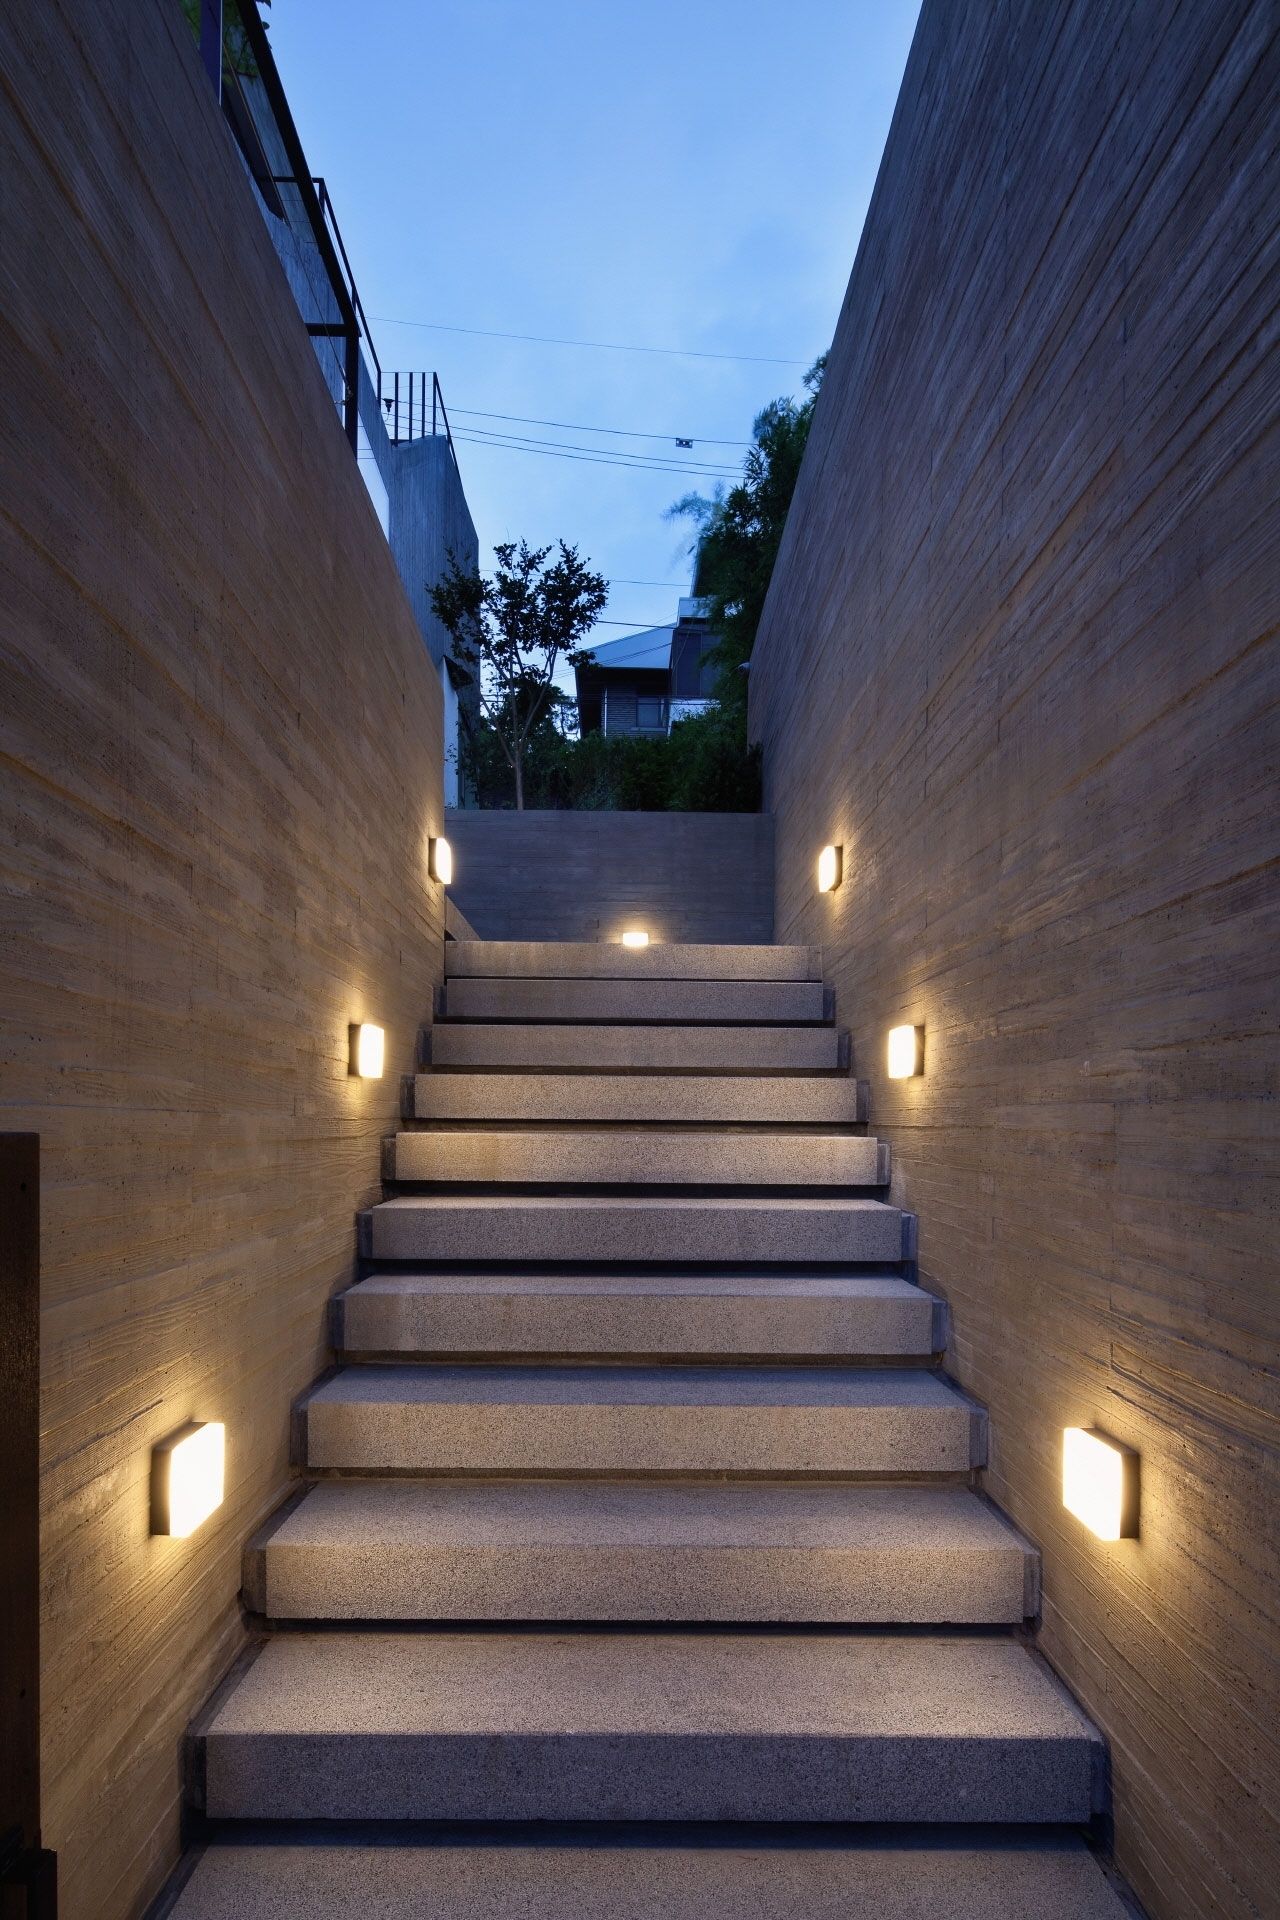 Lighting For Houses Outdoor Wall Lights For Houses Awesome Led Only For Outside Wall Lights For House (View 2 of 15)